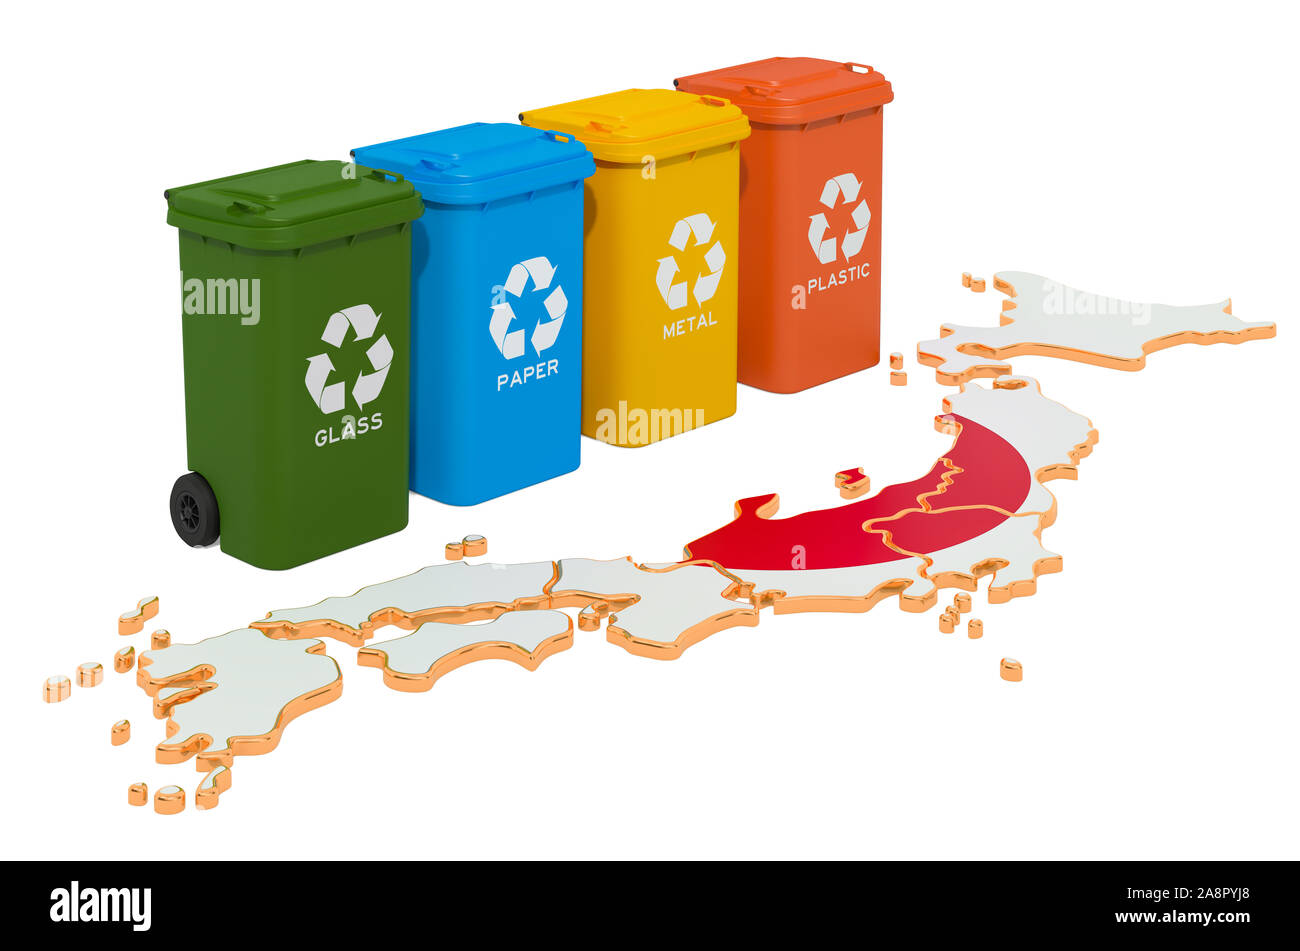 Waste recycling in Japan. Colored trash cans on the map of Japan, 3D rendering isolated on white background Stock Photo